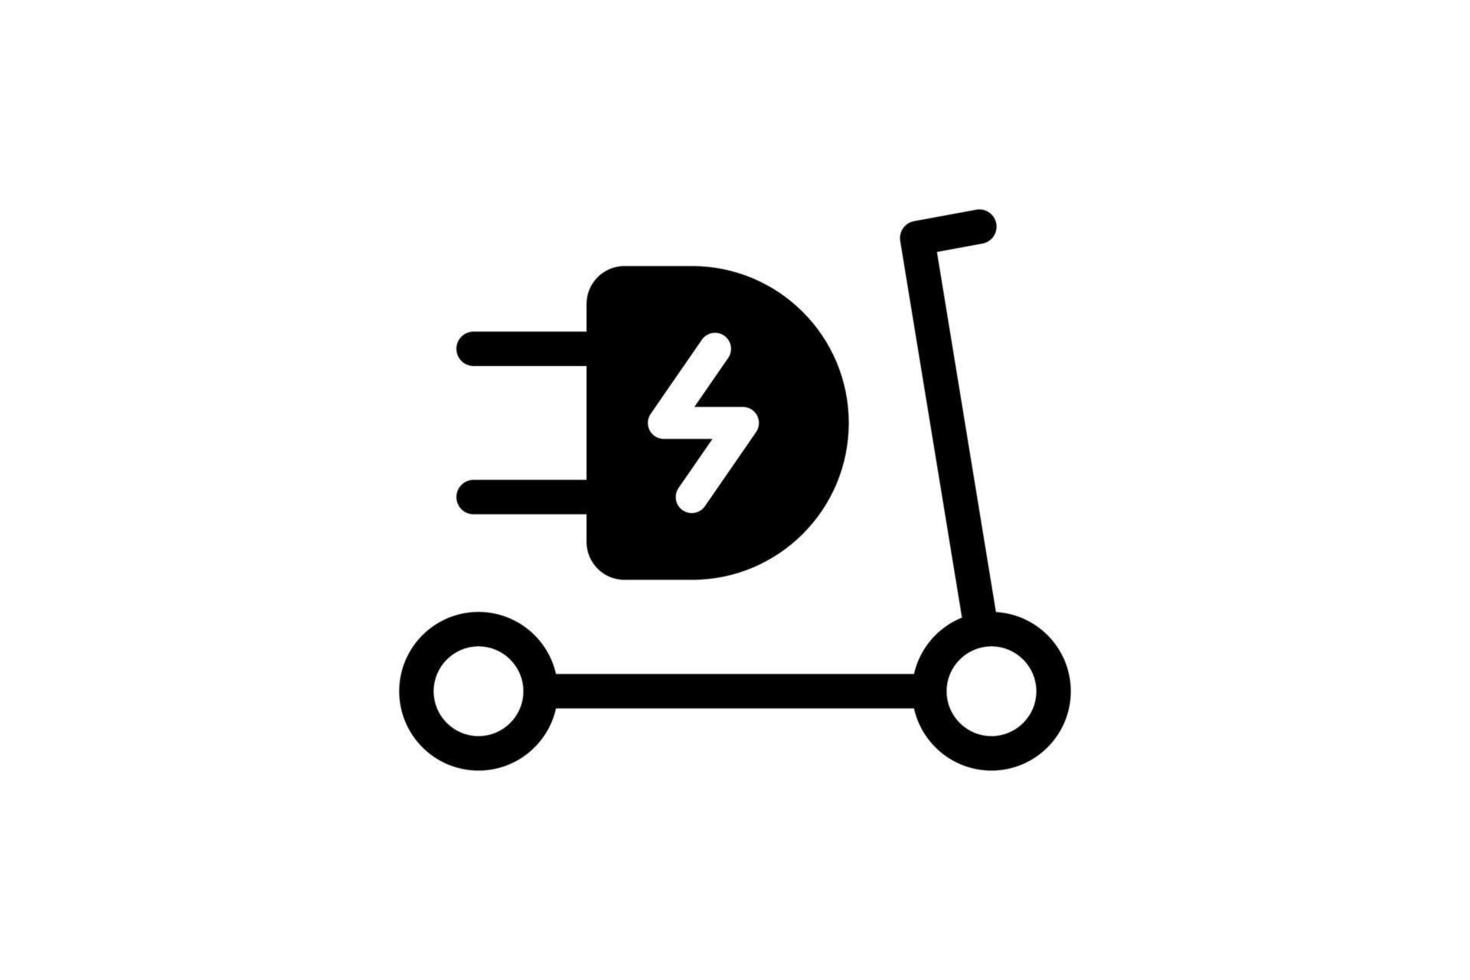 Electric push scooter icon. Black cable electrical kick e-scooter contour and plug charging symbol. Eco friendly electro vehicle logo concept. Vector battery powered EV transportation eps illustration